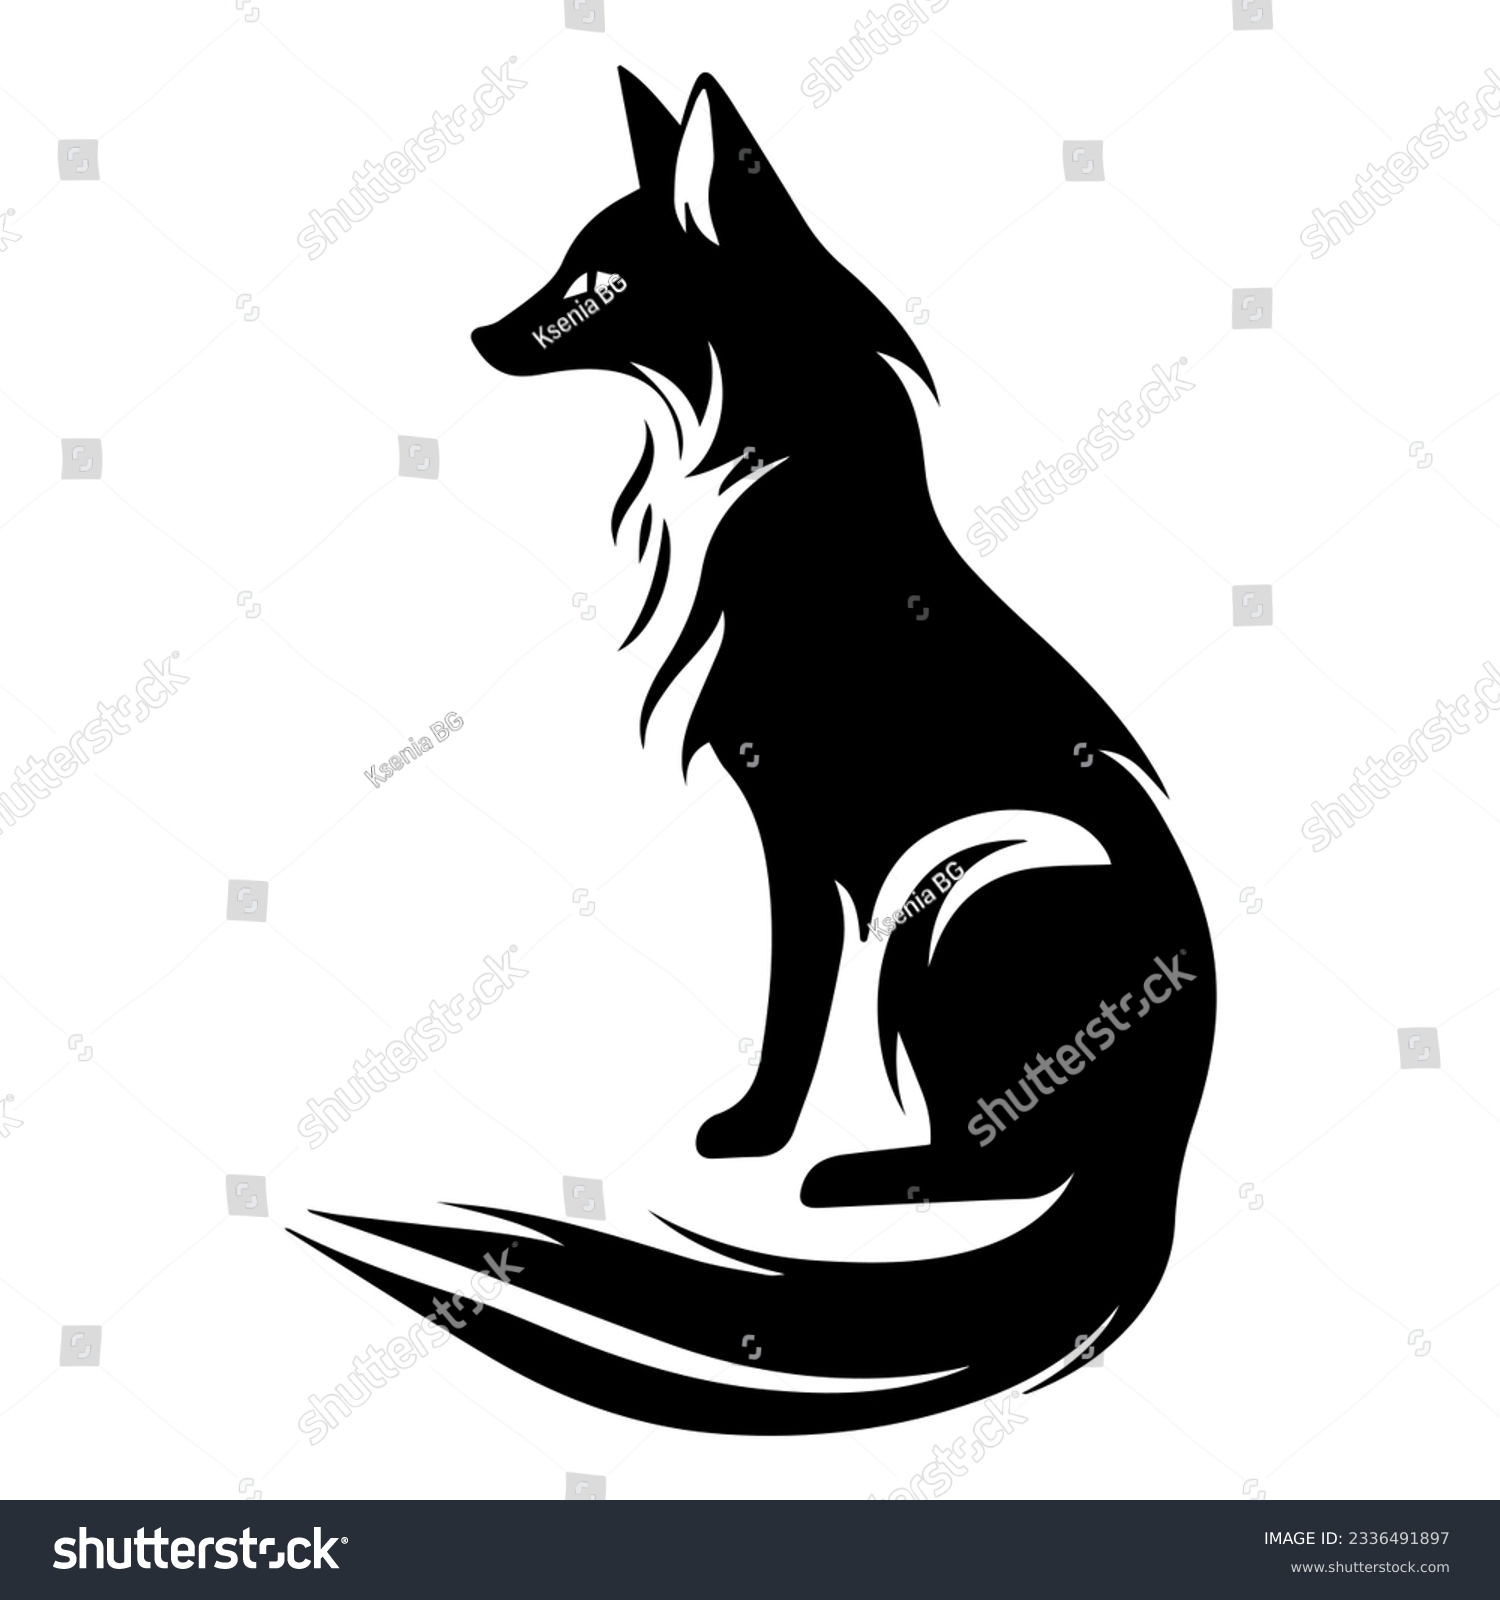 SVG of Black silhouette of a sitting fox. Wild animal with tail for tattoo or logo design svg